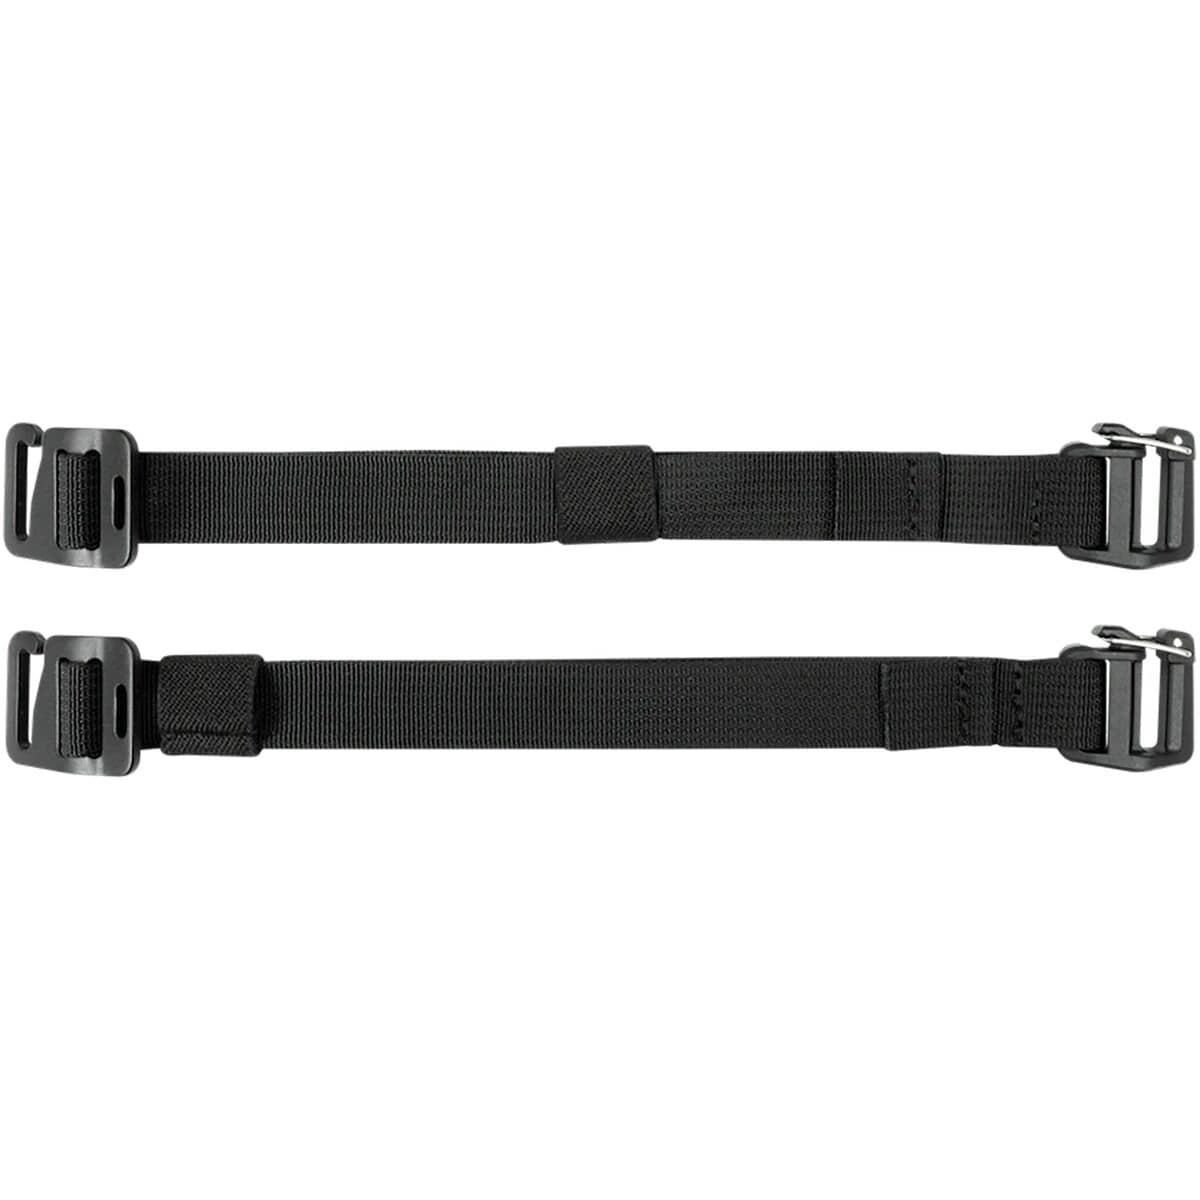 ABS Avalanche Rescue Devices A.Light - Snowboard Strap Black